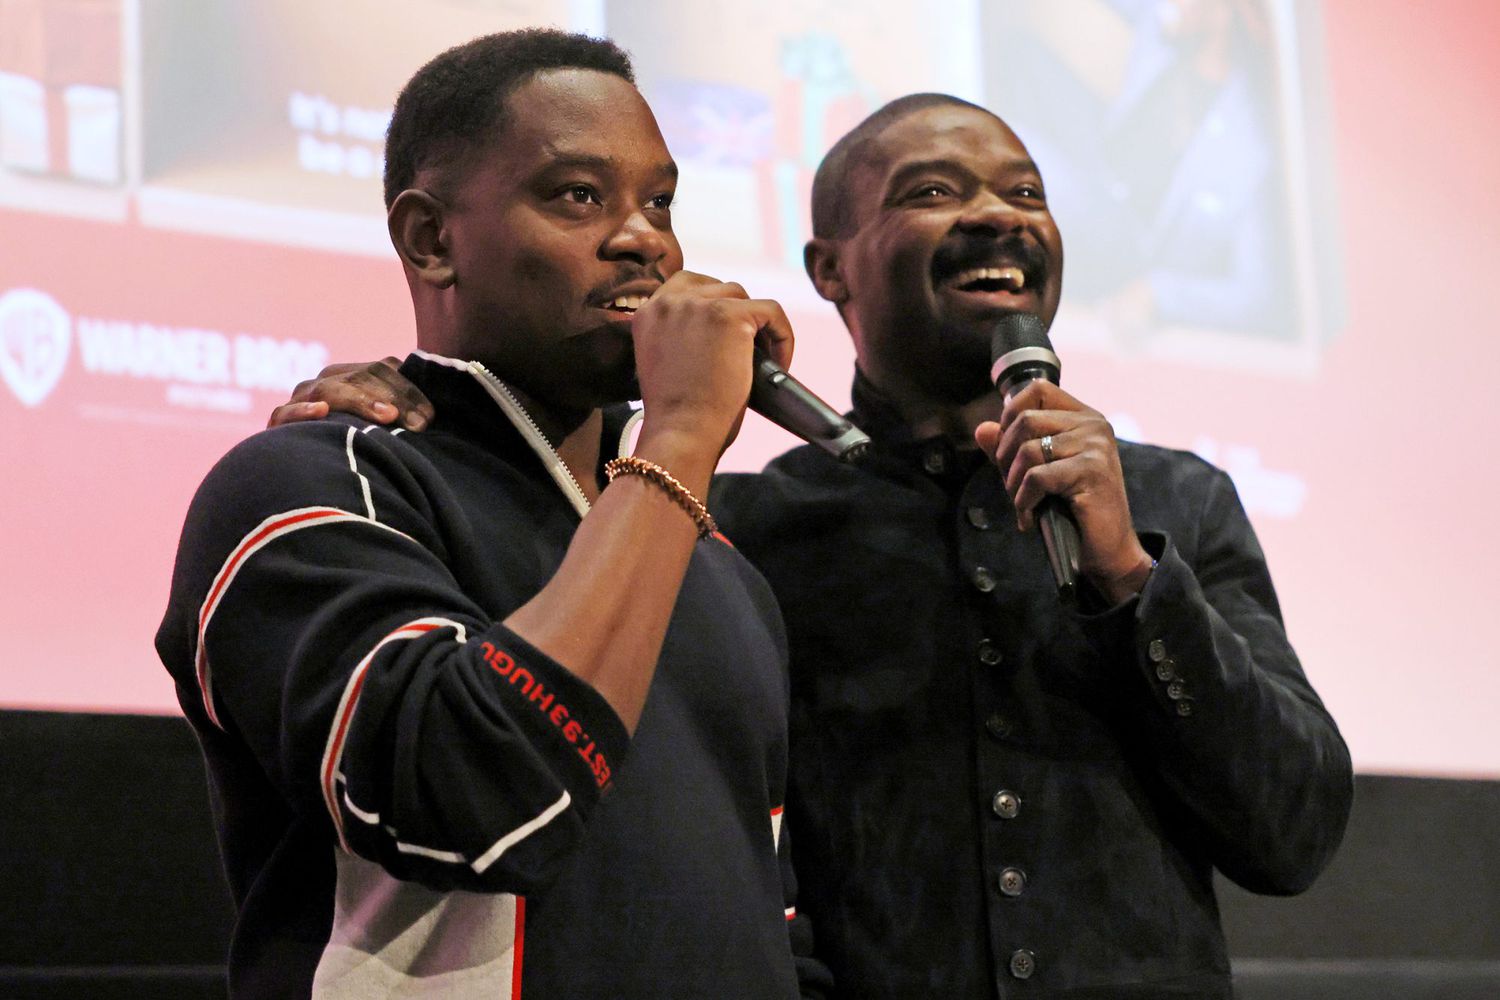 LONDON, ENGLAND - NOVEMBER 28: Aml Ameen and David Oyelowo introduce the "Boxing Day" special screening hosted by David Oyelowo at Warner House on November 28, 2021 in London, England. (Photo by David M. Benett/Dave Benett/Getty Images for Warner Brothers)